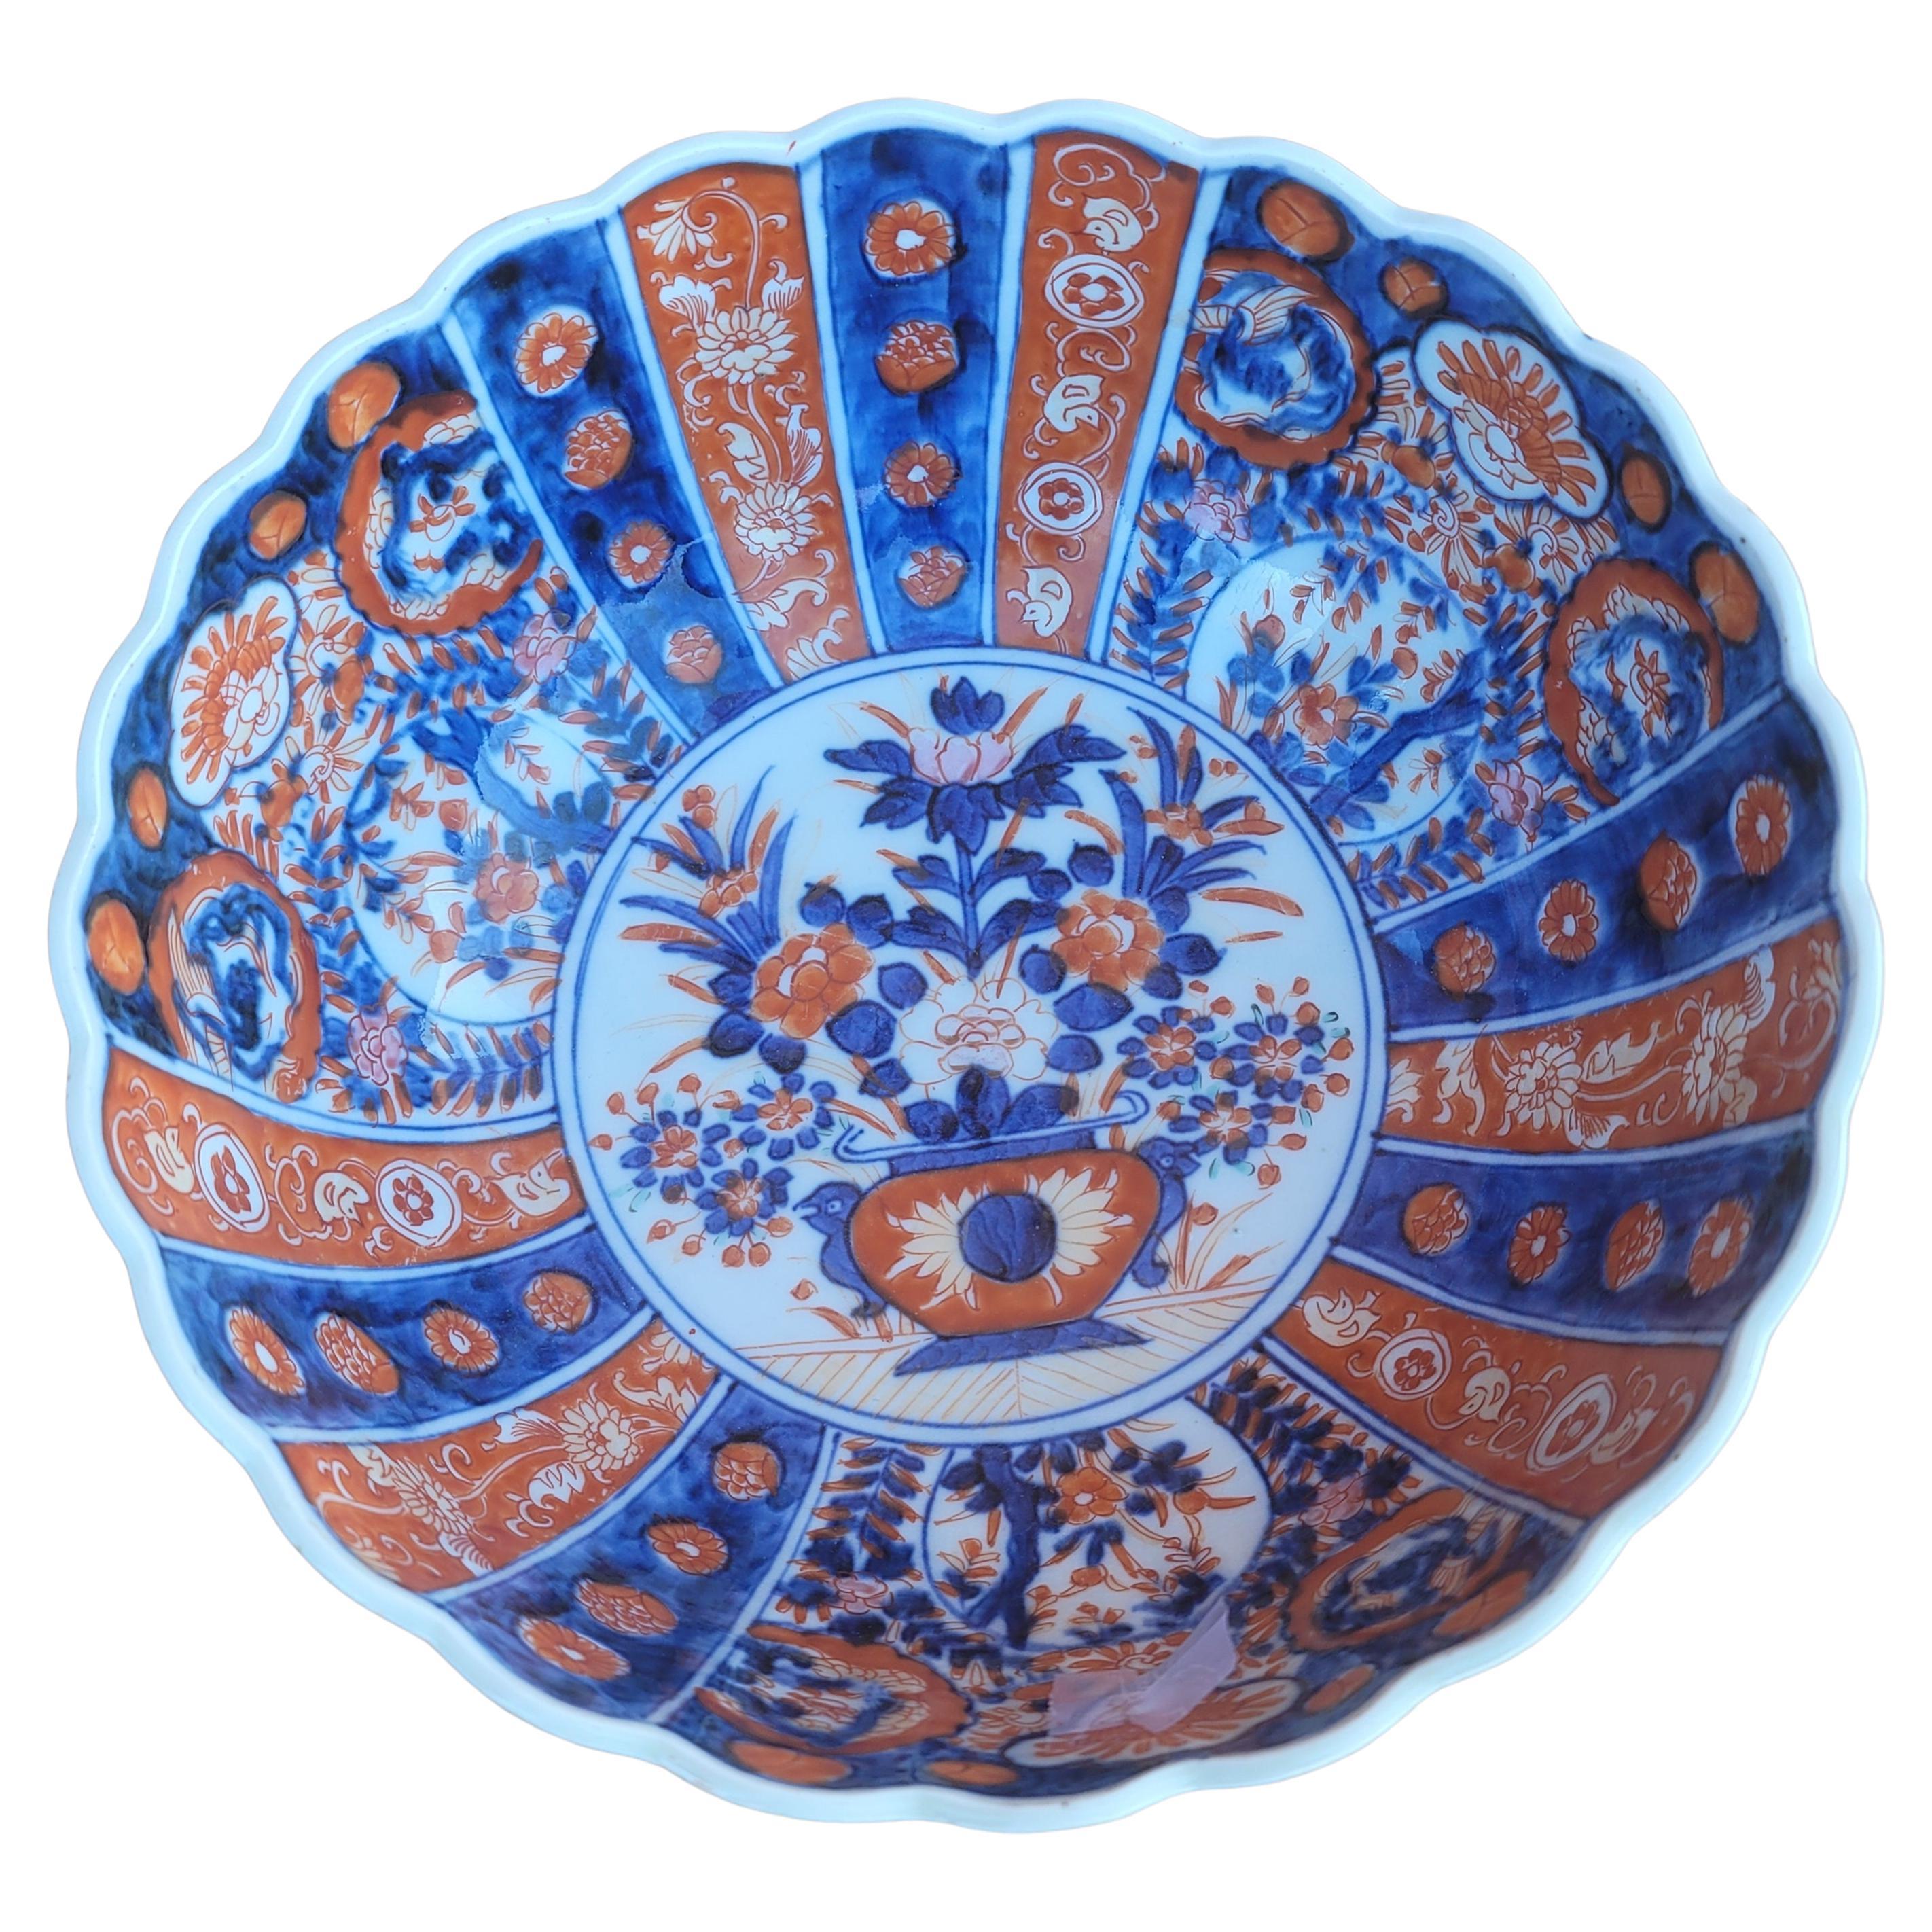 19th Century Japanese Imari Decorative Centerpiece Bowl In Good Condition For Sale In Germantown, MD